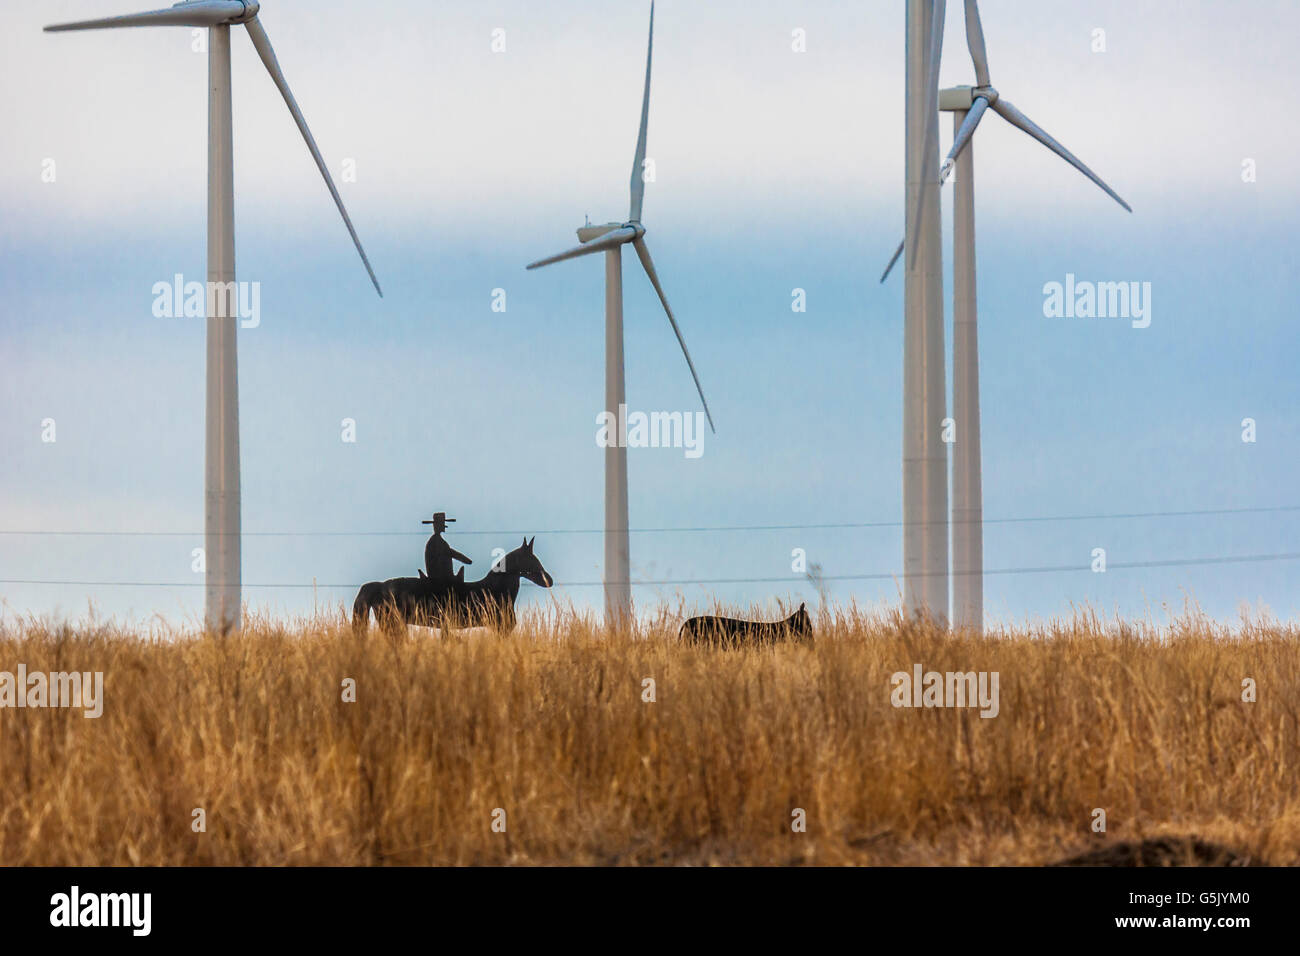 Cutouts of cowboy and cow at wind farm with wind turbine generators in rural north eastern Nebraska Stock Photo